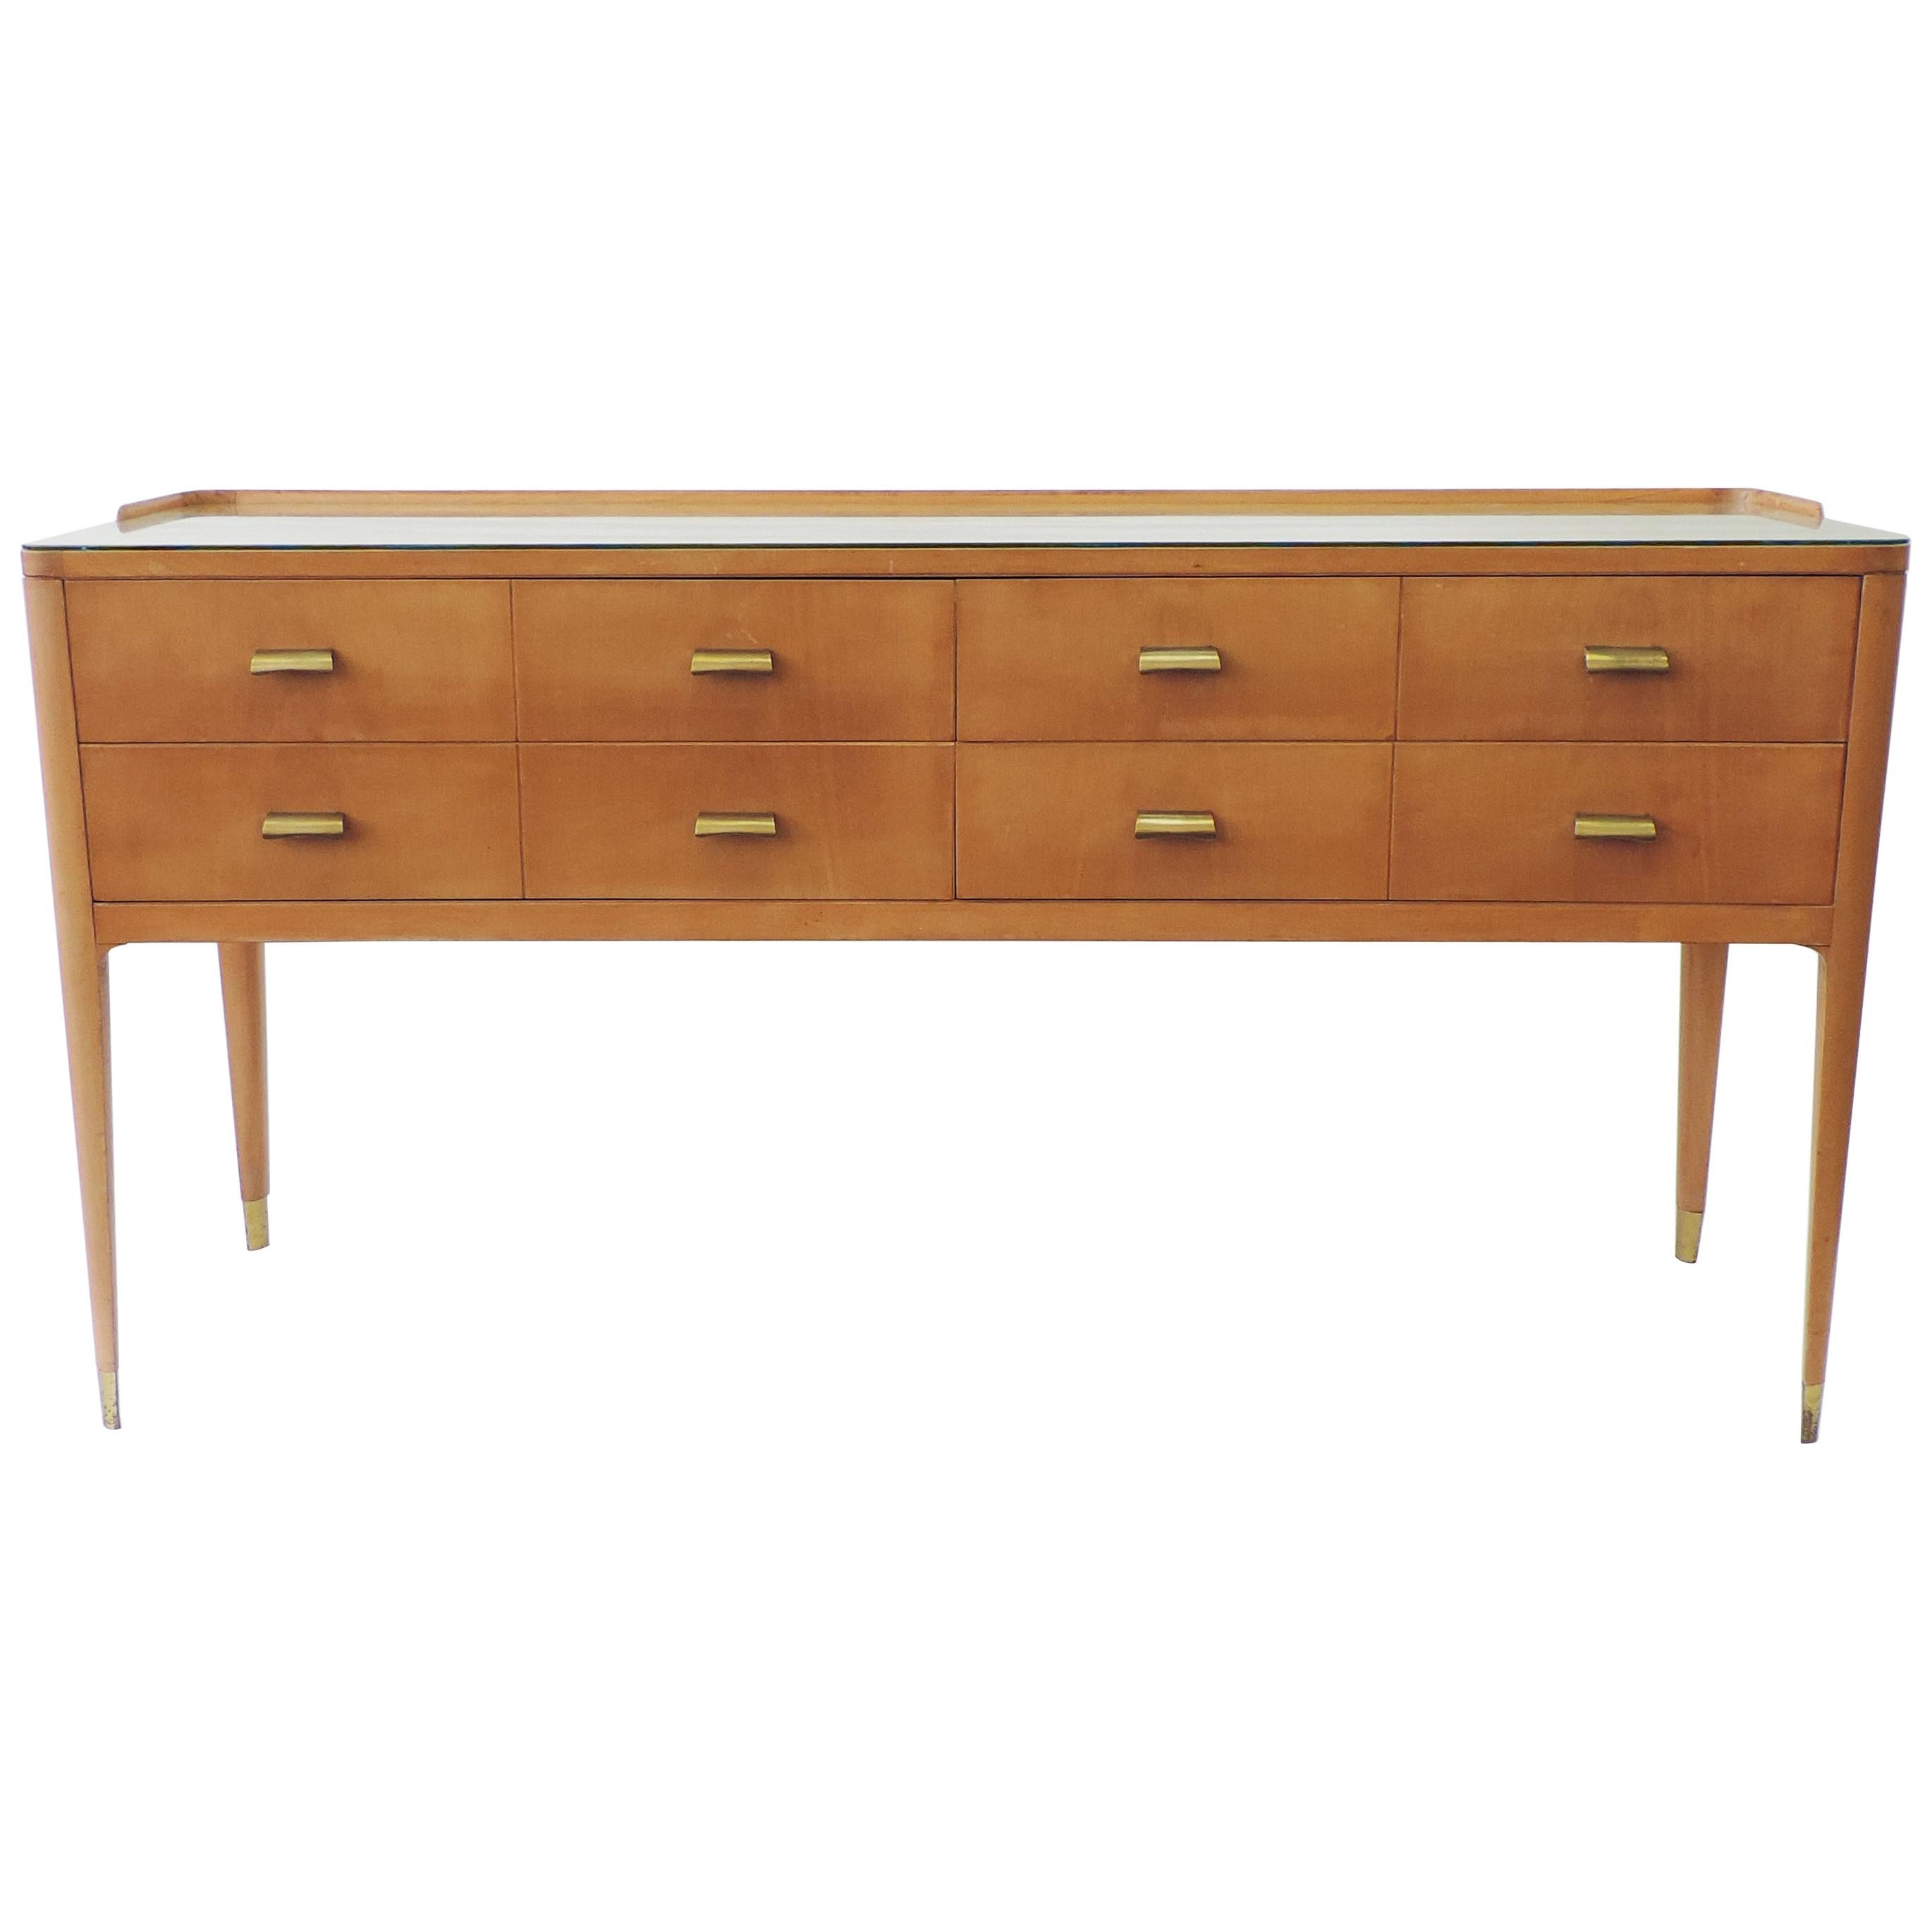 Italian 1950s Curved Wooden Sideboard with Brass Handles